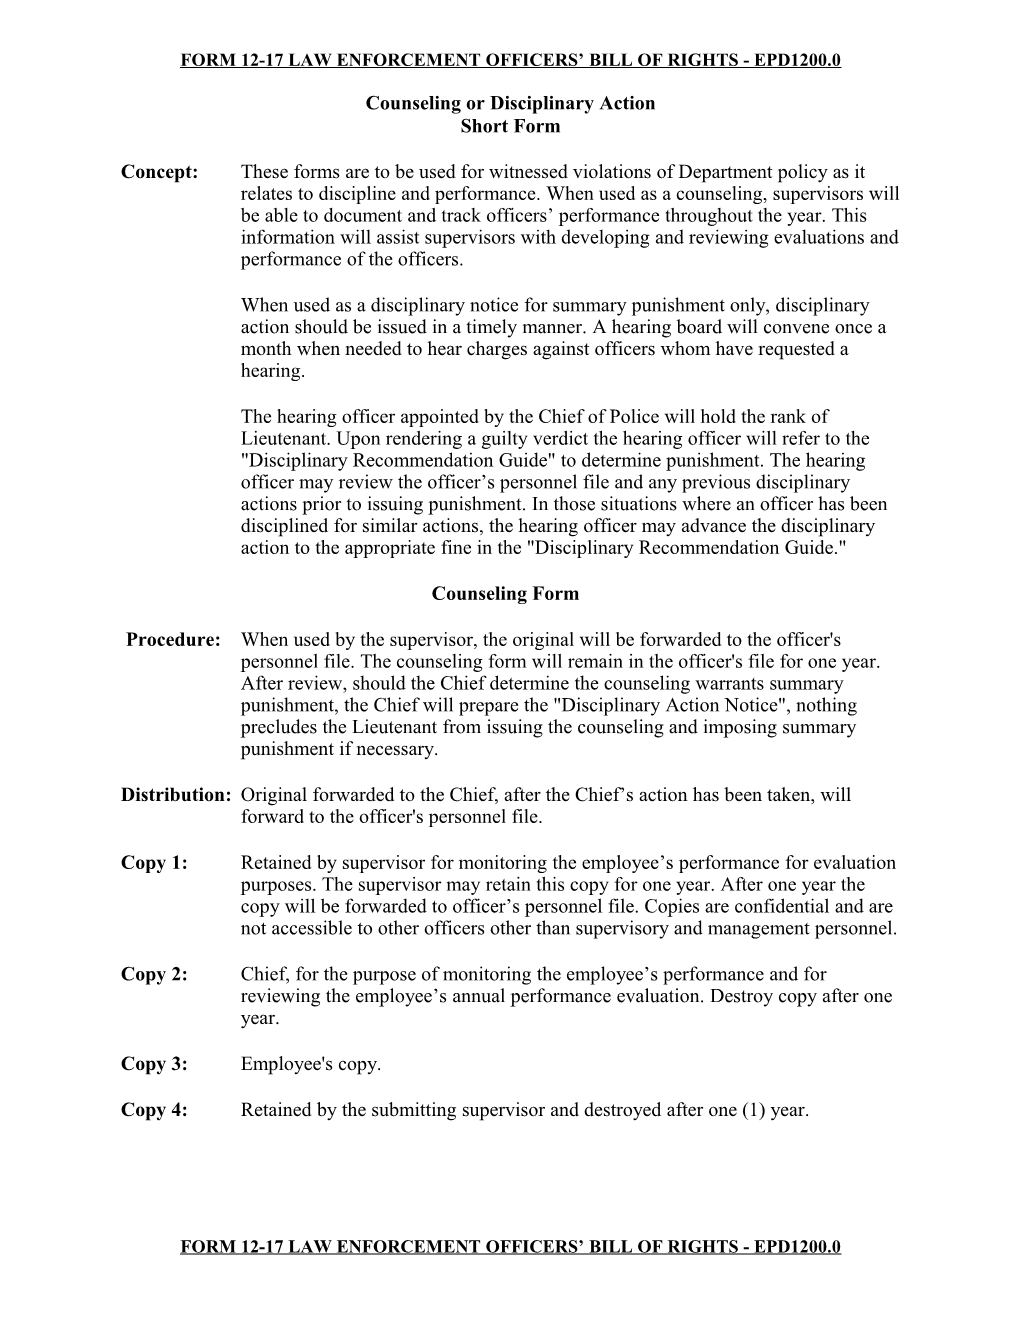 Appendix Q - Law Enforcement Officer S Bill of Rights - Pg1500